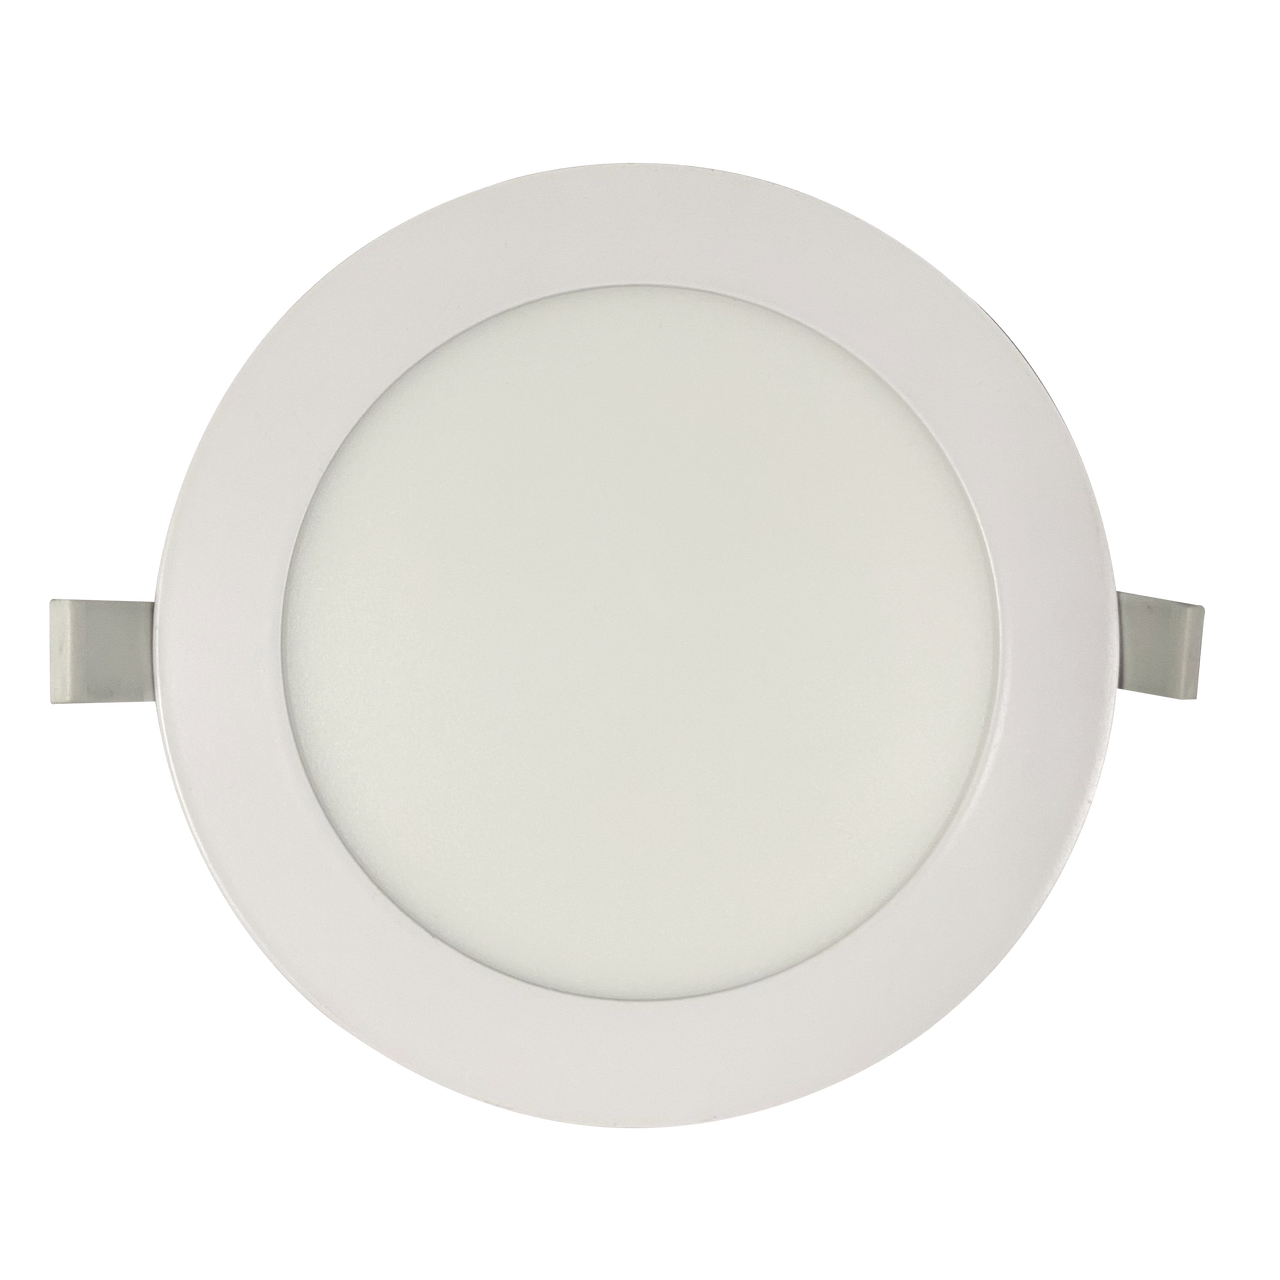 ▪ Available in 3000k (warm white) and 4000k (neutral white) color
temperatures.*
▪ Long-life LEDs provide at least 70% of initial lumen output (L70) for
70,000 hours of operation.**
▪ Color rendering index (Ra) > 80.
▪ UTDR-4 provides 660 nominal lumens from 9 watts and UTDR-6
provides 860 nominal lumens from 12 watts.
▪ Input voltage = 120V 60Hz
▪ Power factor > 0.90.
▪ Total harmonic distortion < 20%.
▪ Triac dimming.
▪ Steel housing, painted white. Polystyrene lens.
▪ Easy installation in new construction or retrofit applications.
▪ Compatible with 4” (UTDR-4) and 6” (UTDR-6) ceiling cut-outs.
▪ Type IC, inherently protected. Access above ceiling required.
▪ This device is not intended for use with emergency exits.
▪ cETLus listed for damp locations.
▪ Compatible for new construction and retrofit applications.
▪ Flicker-free per IEEE1789-2015 (no observable adverse effects of
flicker at 100% light output level).
▪ Complies with FCC Part 15, class B.
▪ Surge protection = 2.5kV.
▪ 5-year warranty of all electronics and housing.
* Contact factory for other color temperatures and lumen packages.
** L70 hours are IES TM-21-11 calculated hours.